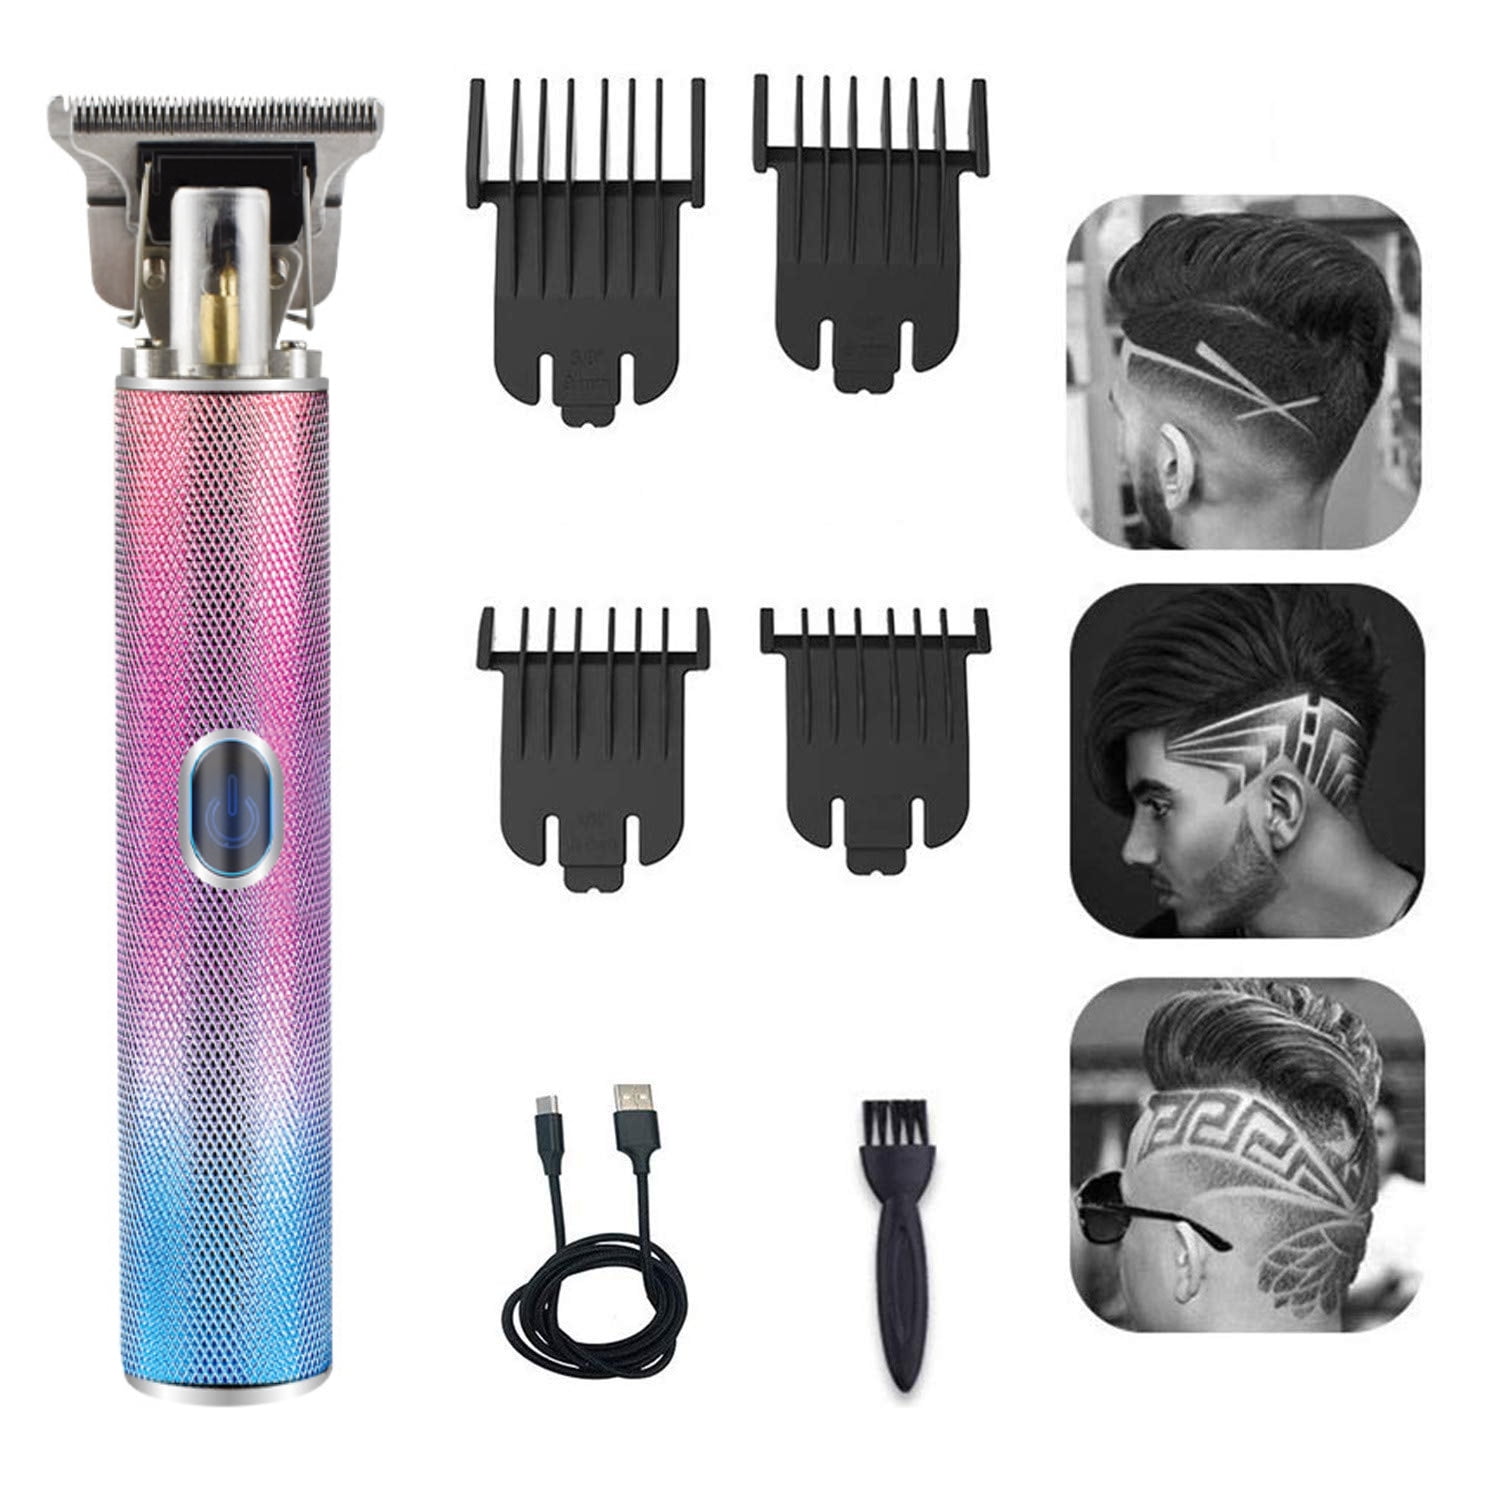 Hair Clippers for Men Children Balding Professional Electric Cordless LCD Display Titanium Blade Haircut Kit with Charging Stand and Oil Rechargeable Lithium-ion Battery Beard Trimmer Wireless 